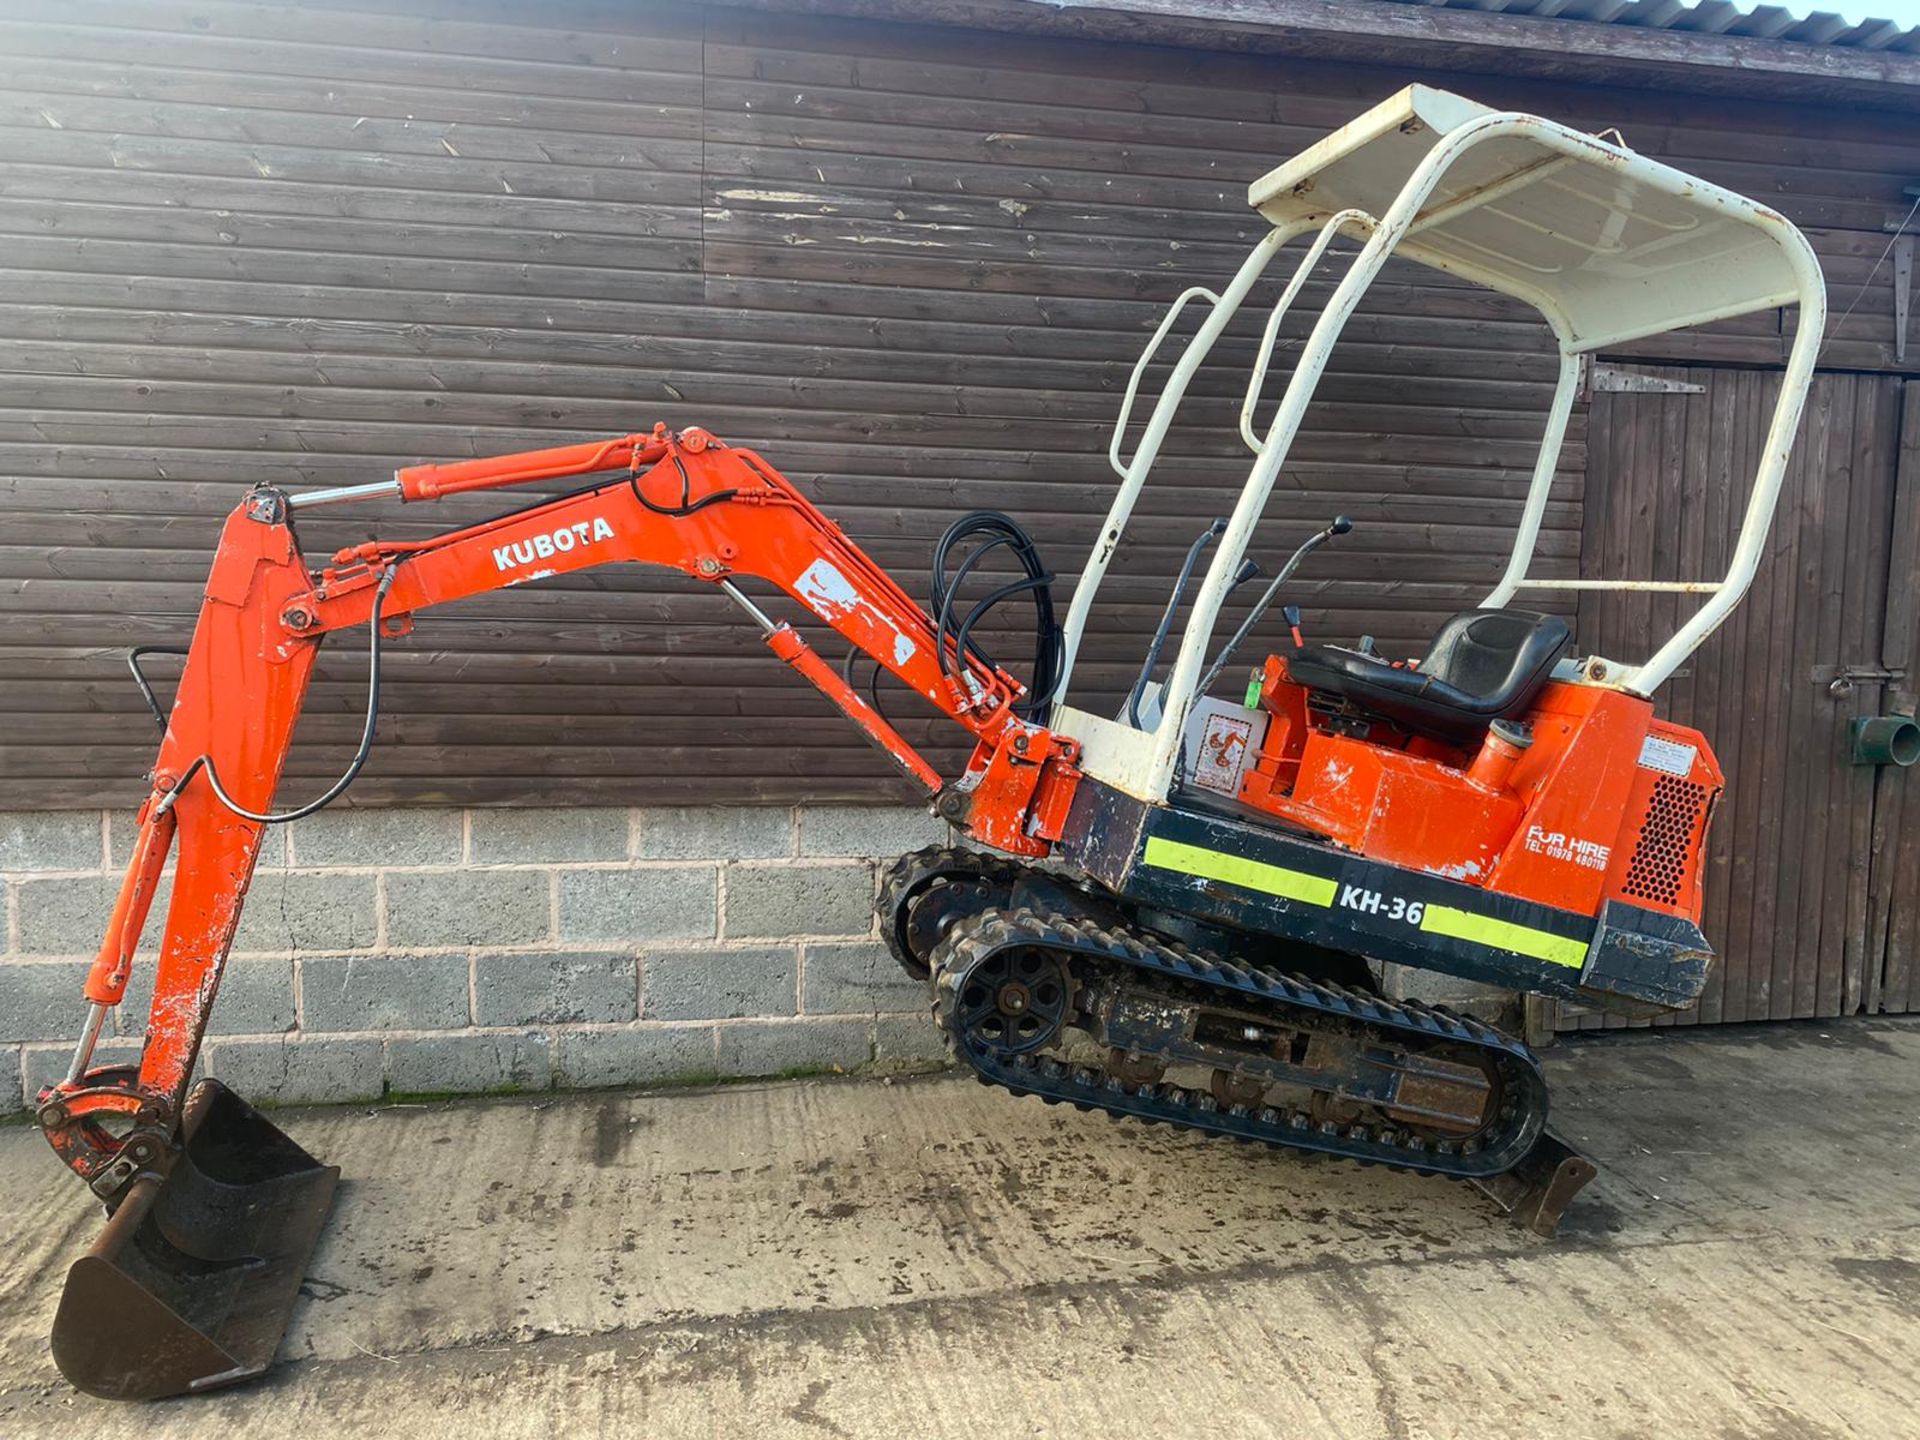 KUBOTA KH-36 MINI DIGGER, CLEAN TIDY MACHINE, HOURS: 3550, STARTS OFF THE KEY RUNS, DRIVES AND DIGS - Image 5 of 8